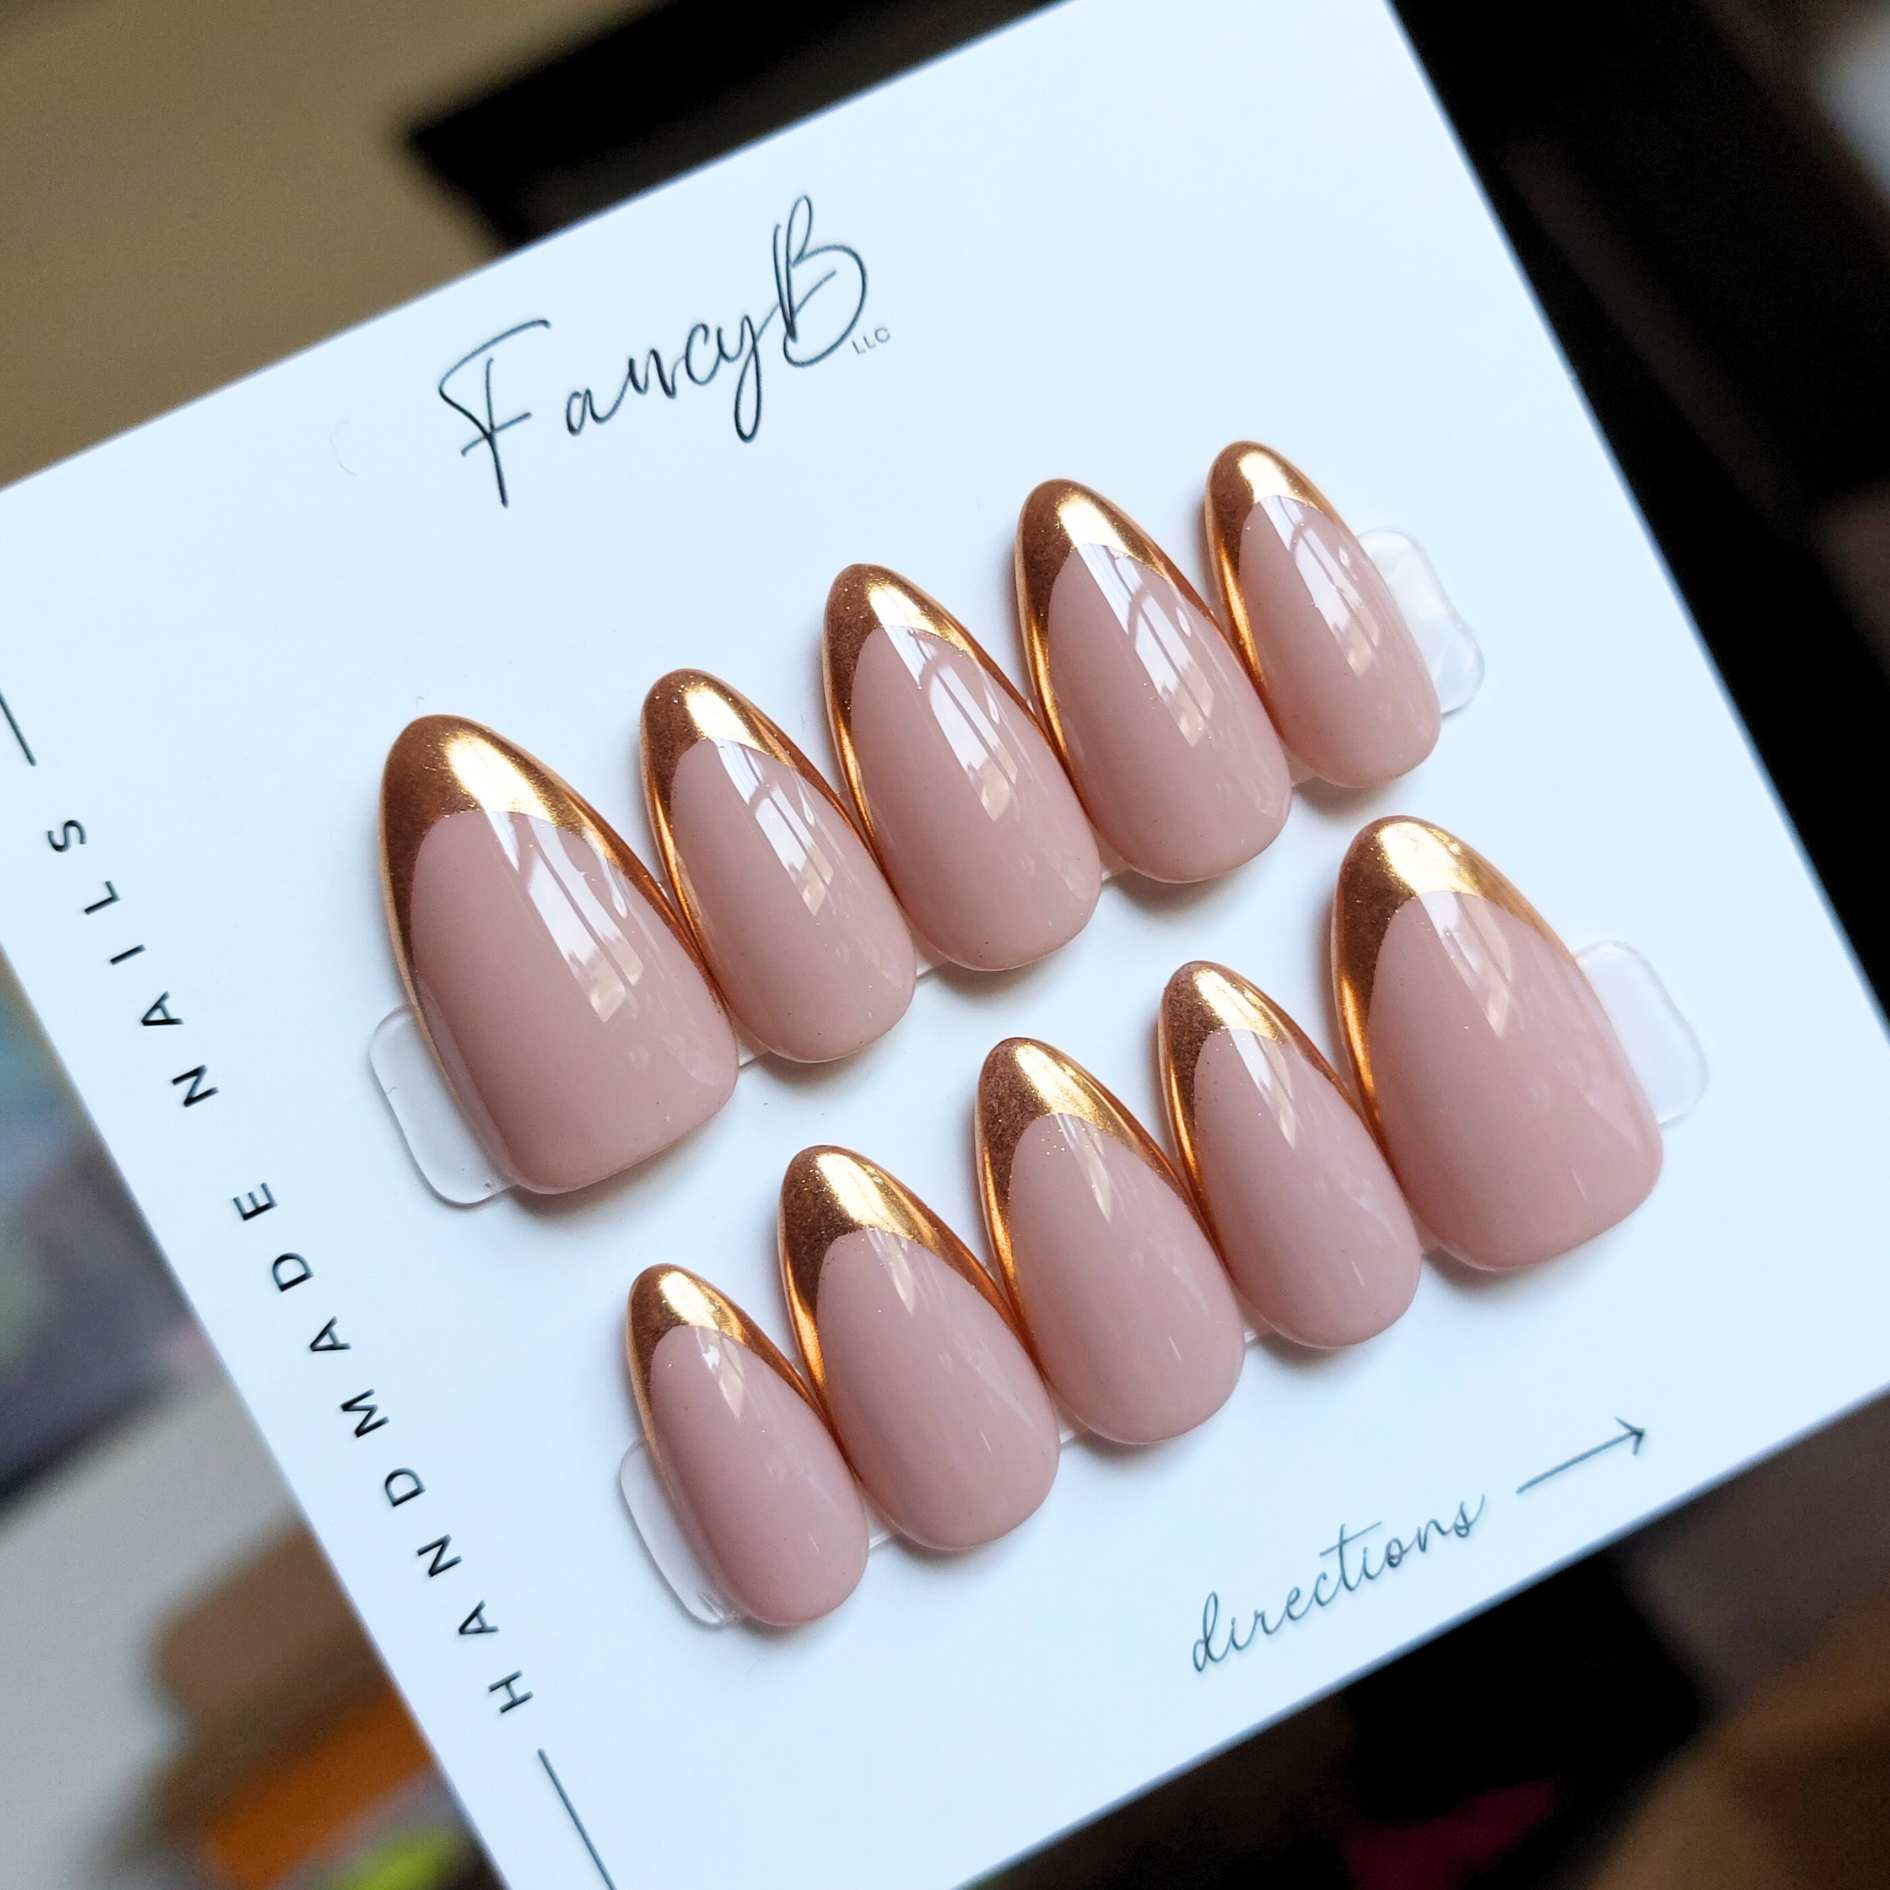 custom chrome french nails with gold chrome french tips on nude base color on a medium almond nail shape from fancyb press on nails